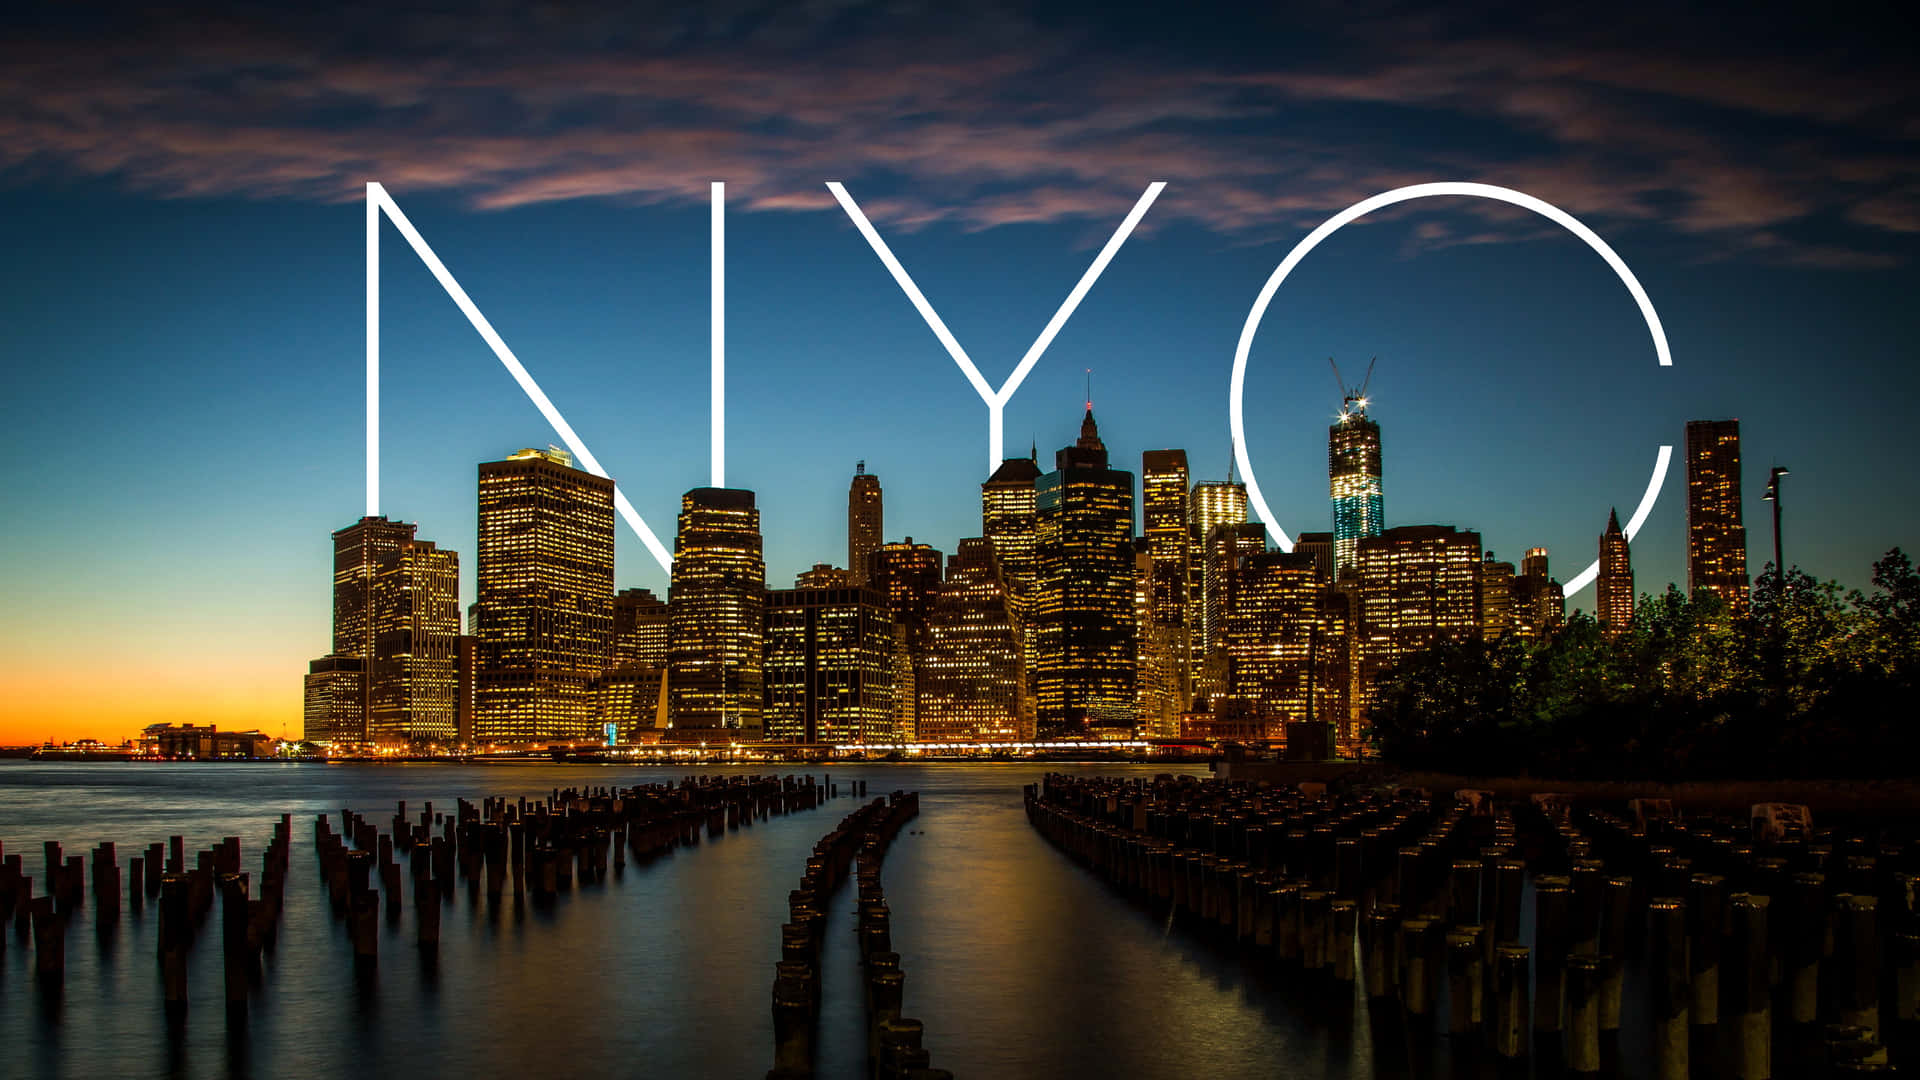 A skyline of the iconic city of New York. Wallpaper